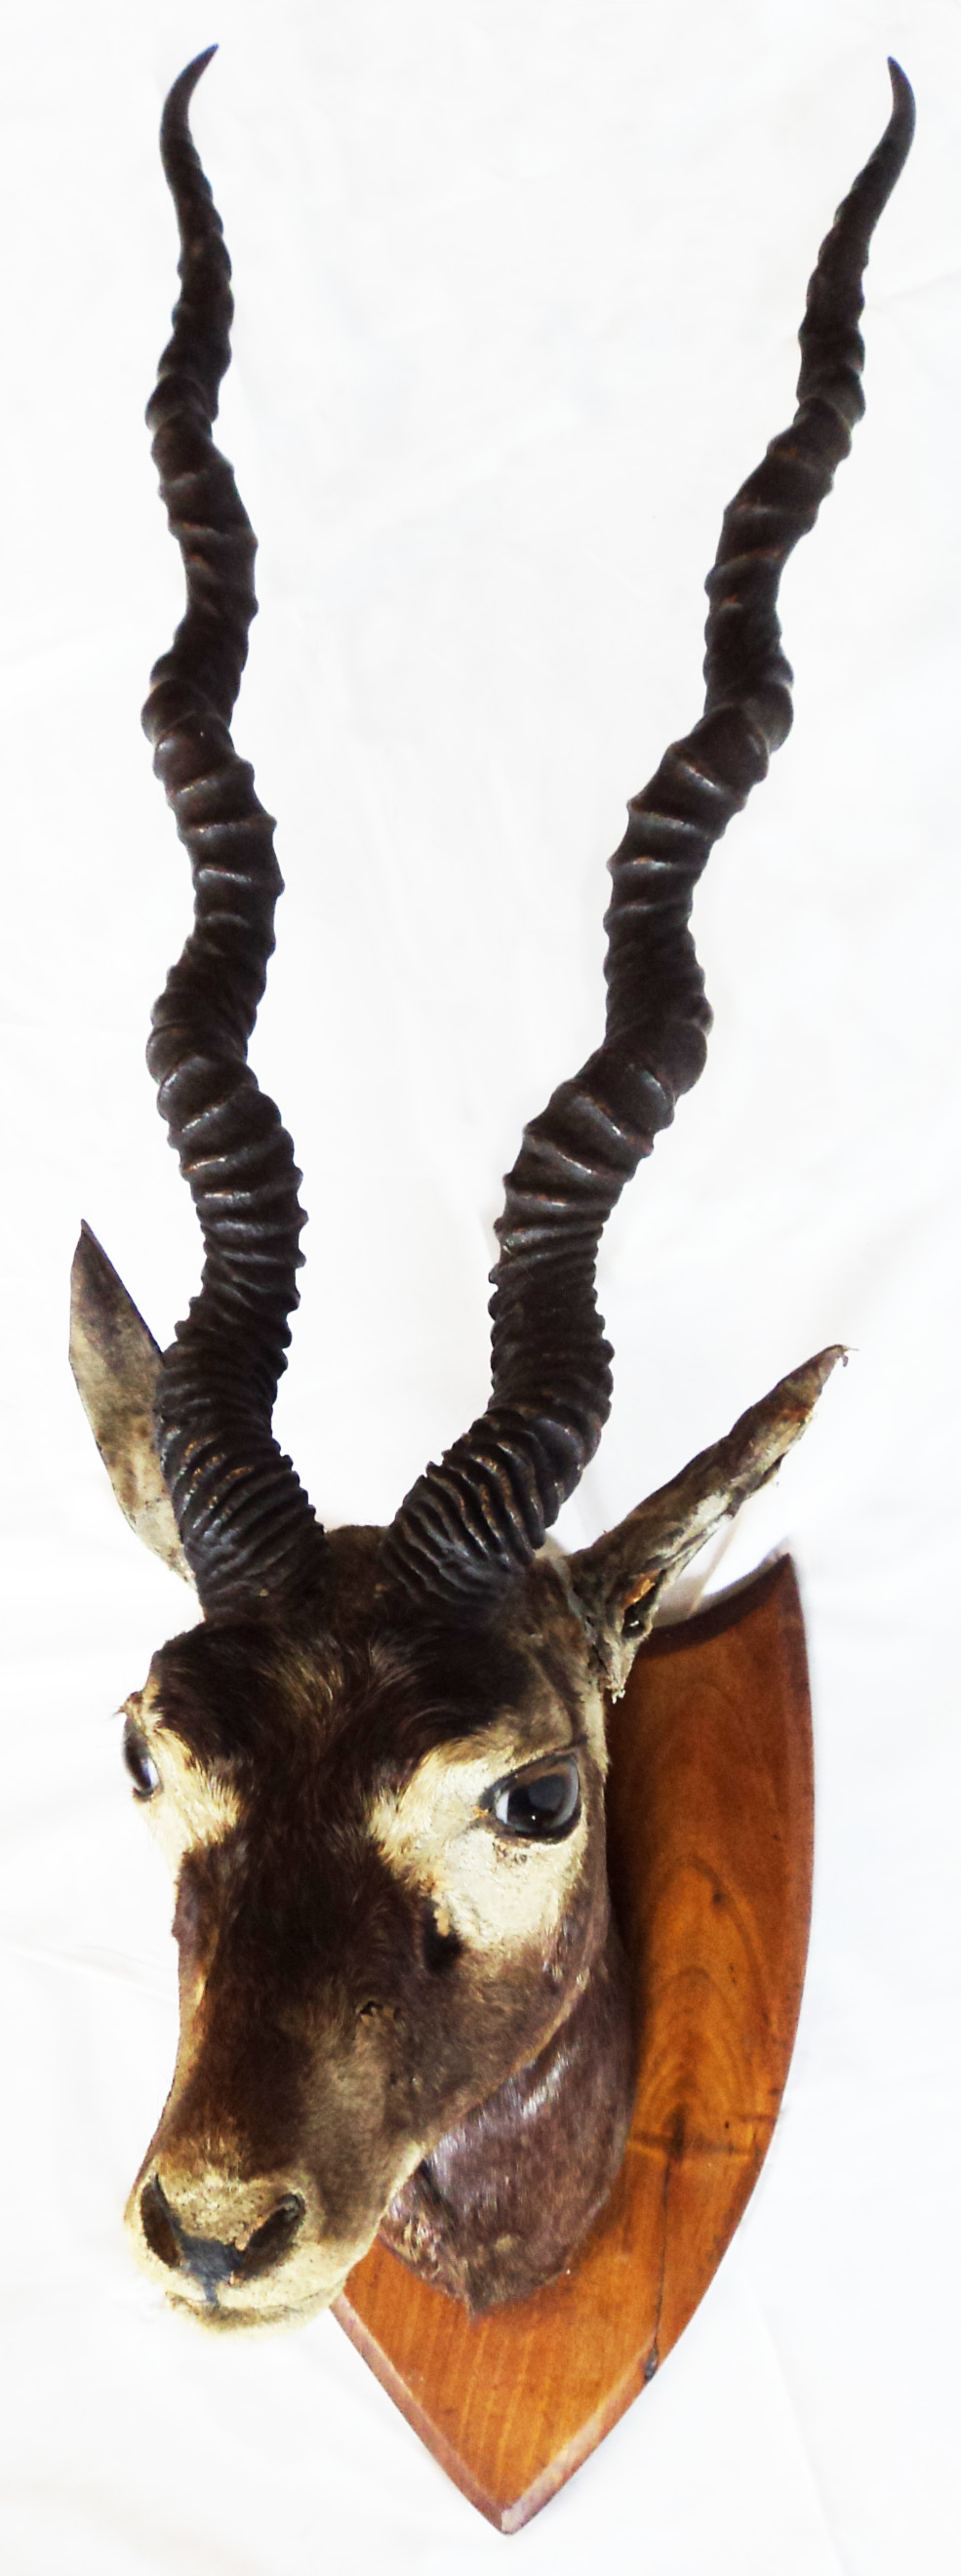 A stuffed blackbuck stag's head mounted on a shield shaped wooden plaque